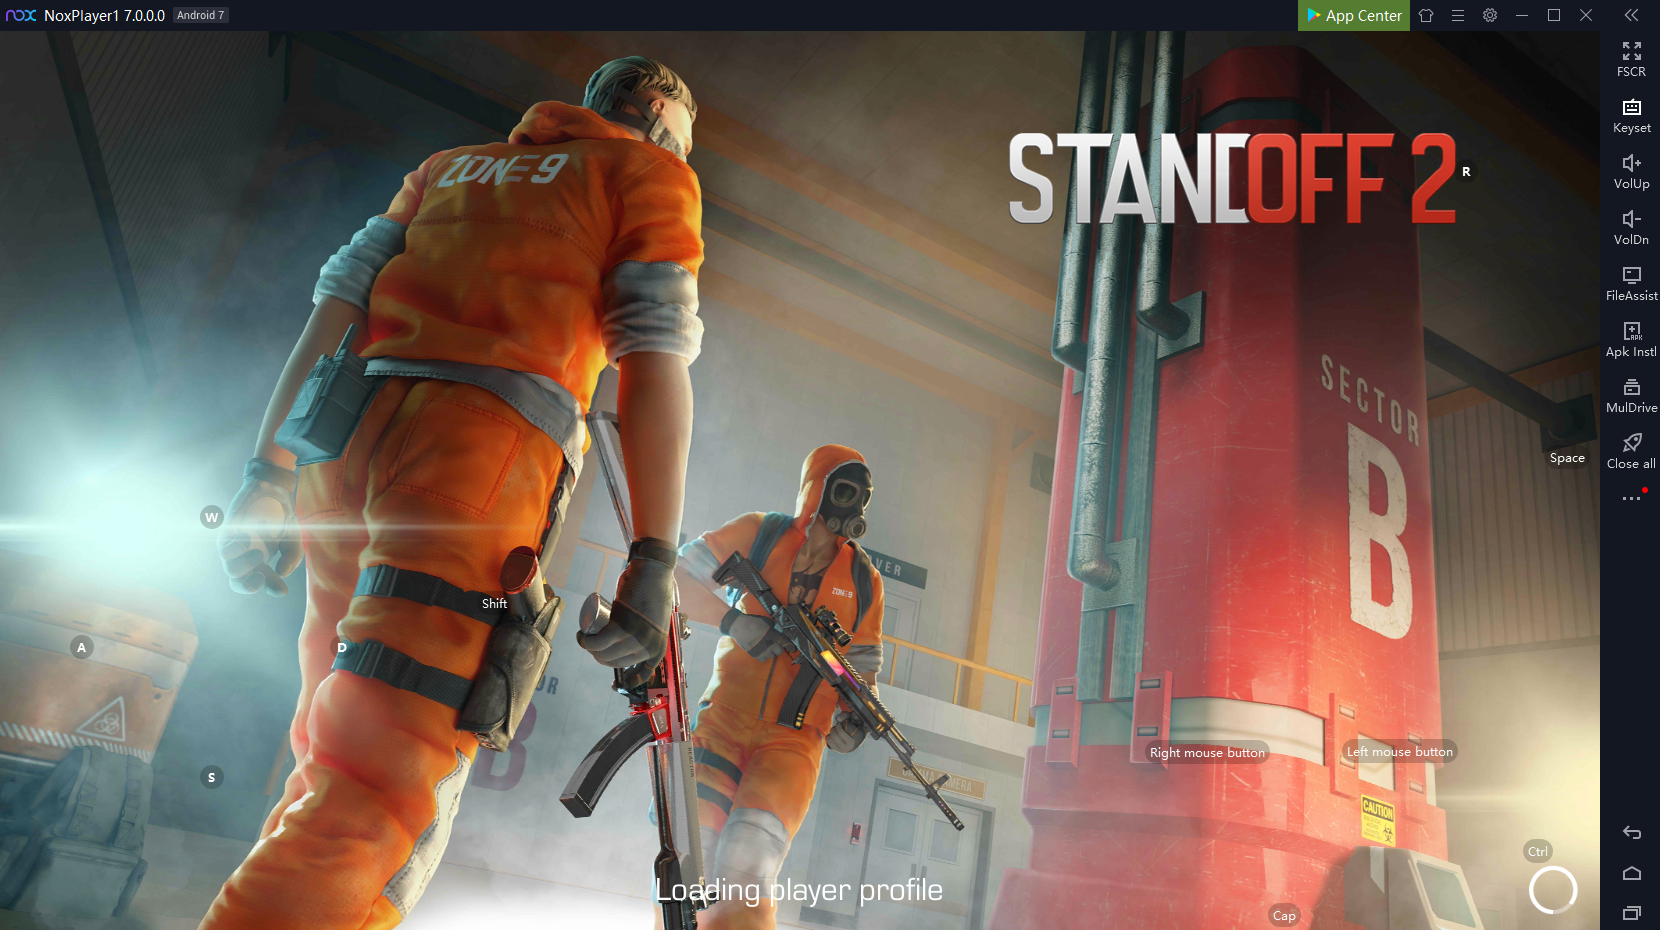 How to Play Standoff 2 on PC